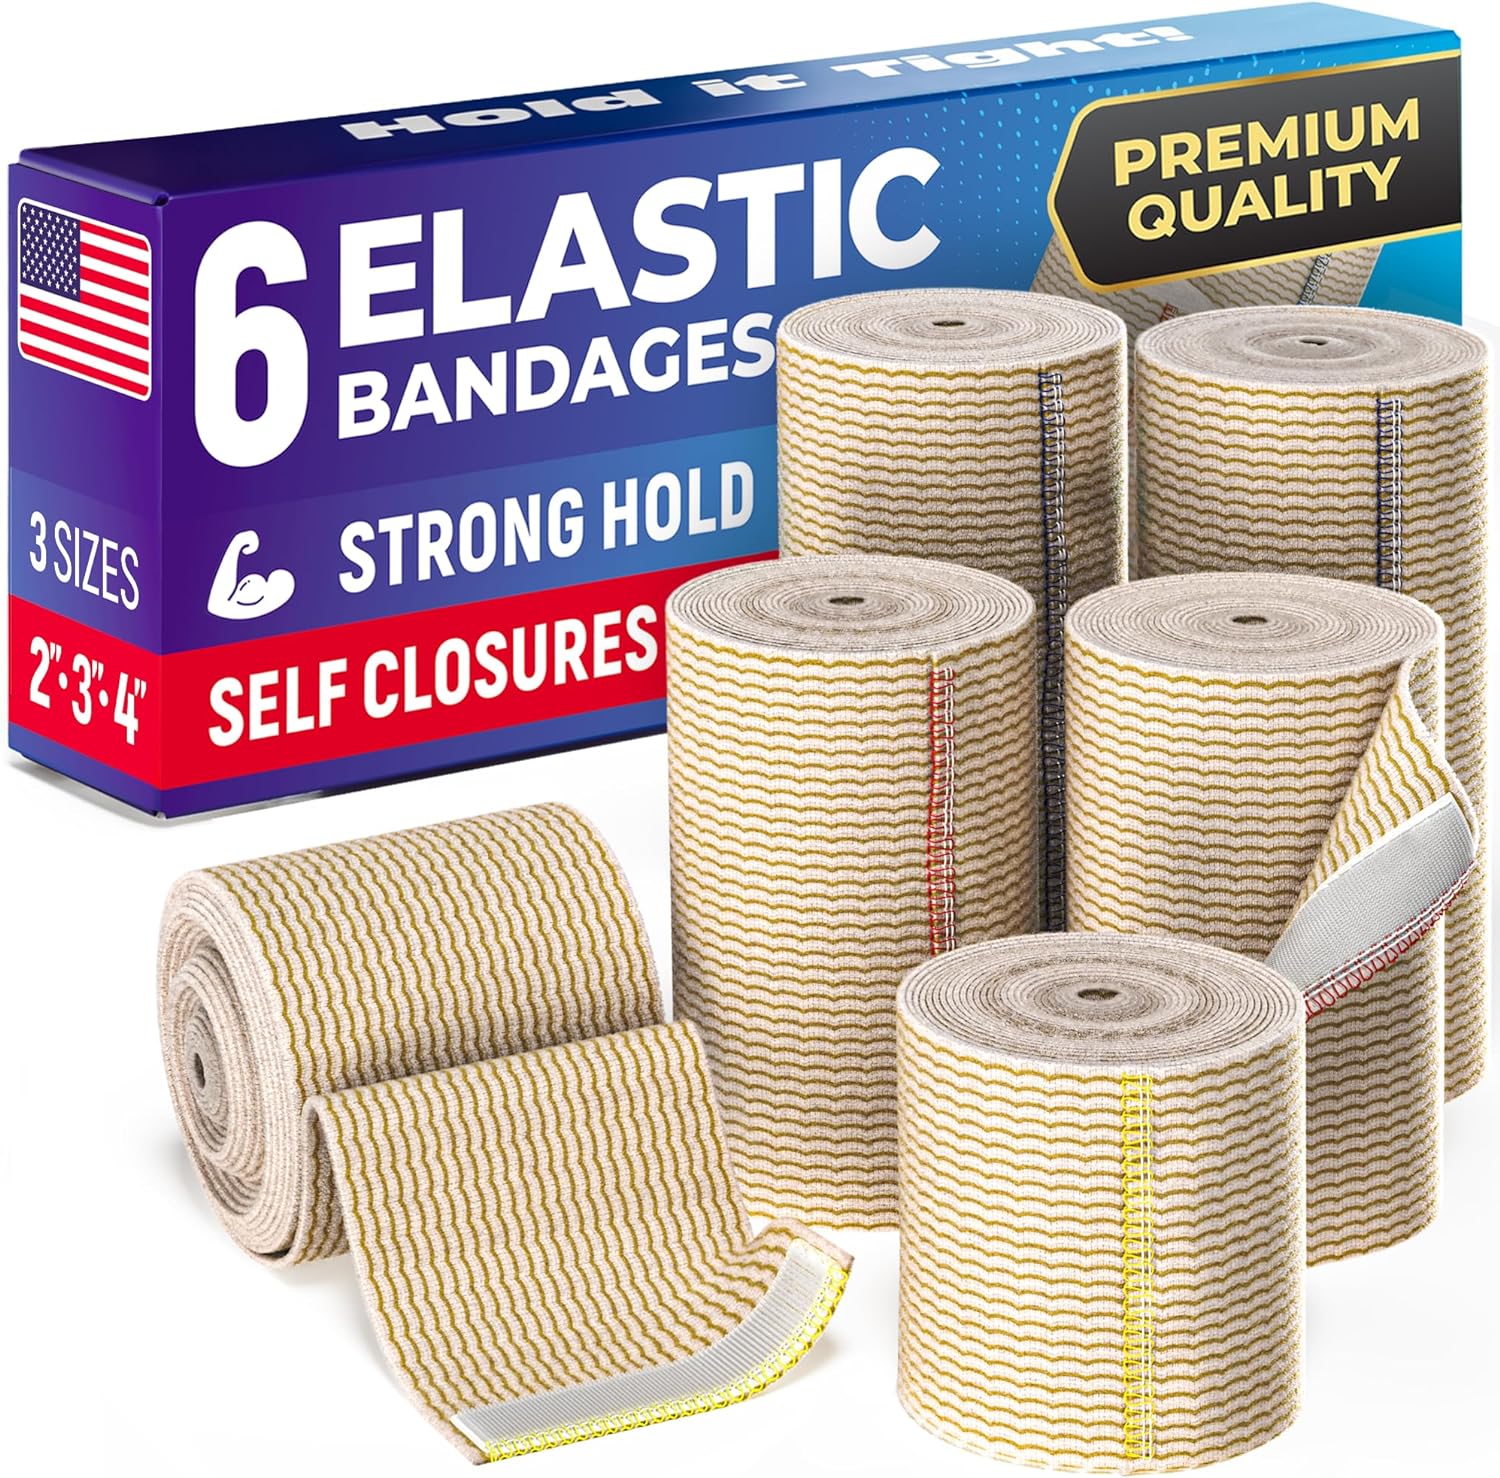 Elastic Compression Bandage Wrap - Premium Quality (Set of 4) with Hooks,  Athletic Sport Support Tape Rolls for Ankle, Wrist, Arm, Leg Sprains | Each